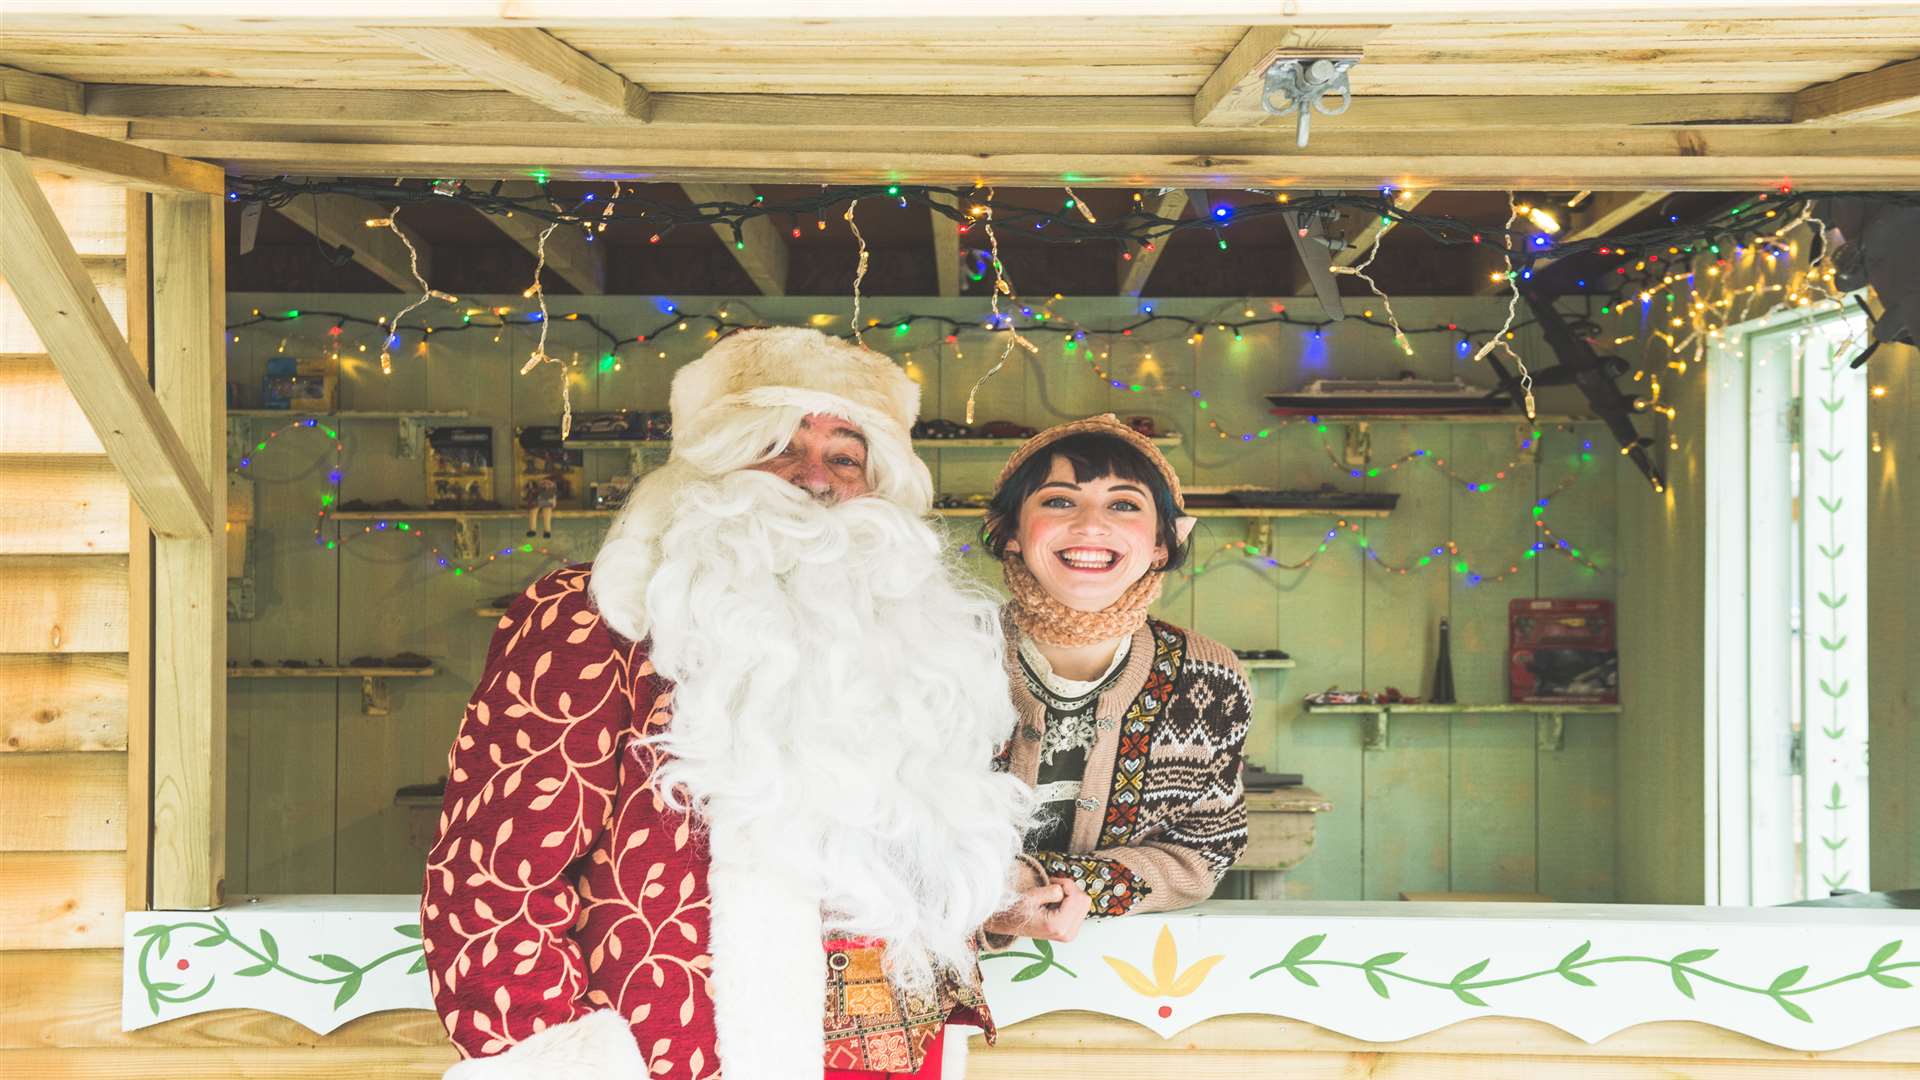 Feel festive at the Frosted Fairground